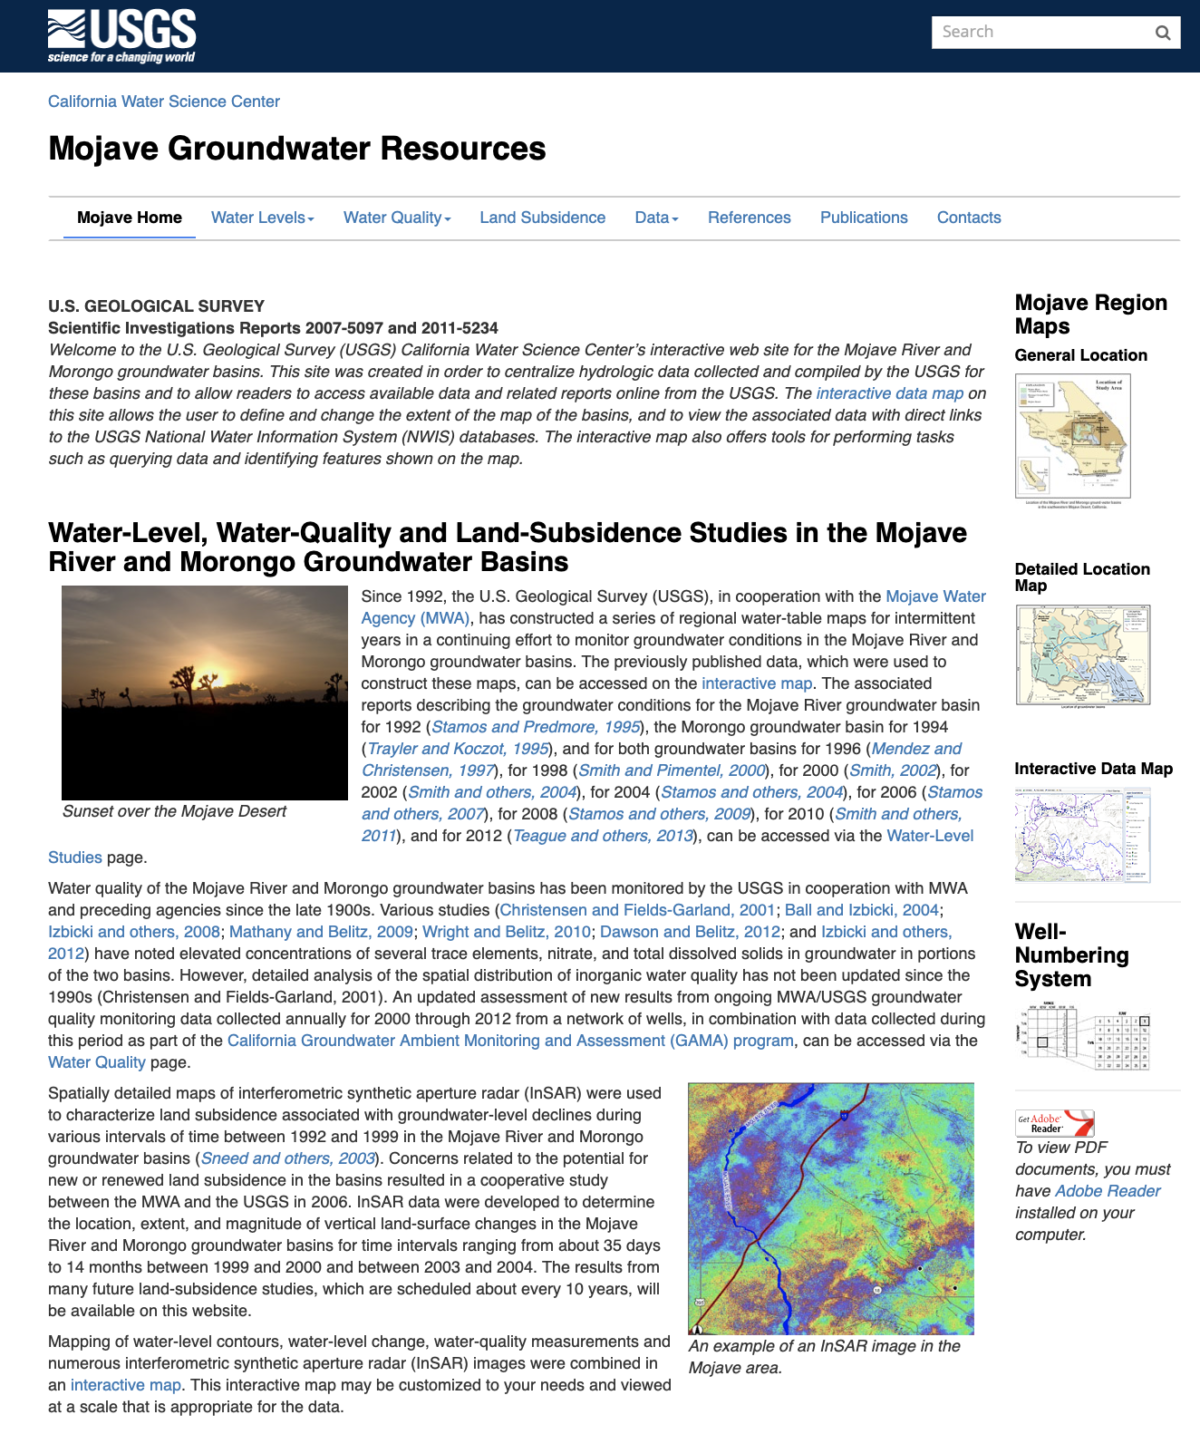 Water-Level and land-subsidence studies in the Mojave River and Morongo groundwater basins; 2007